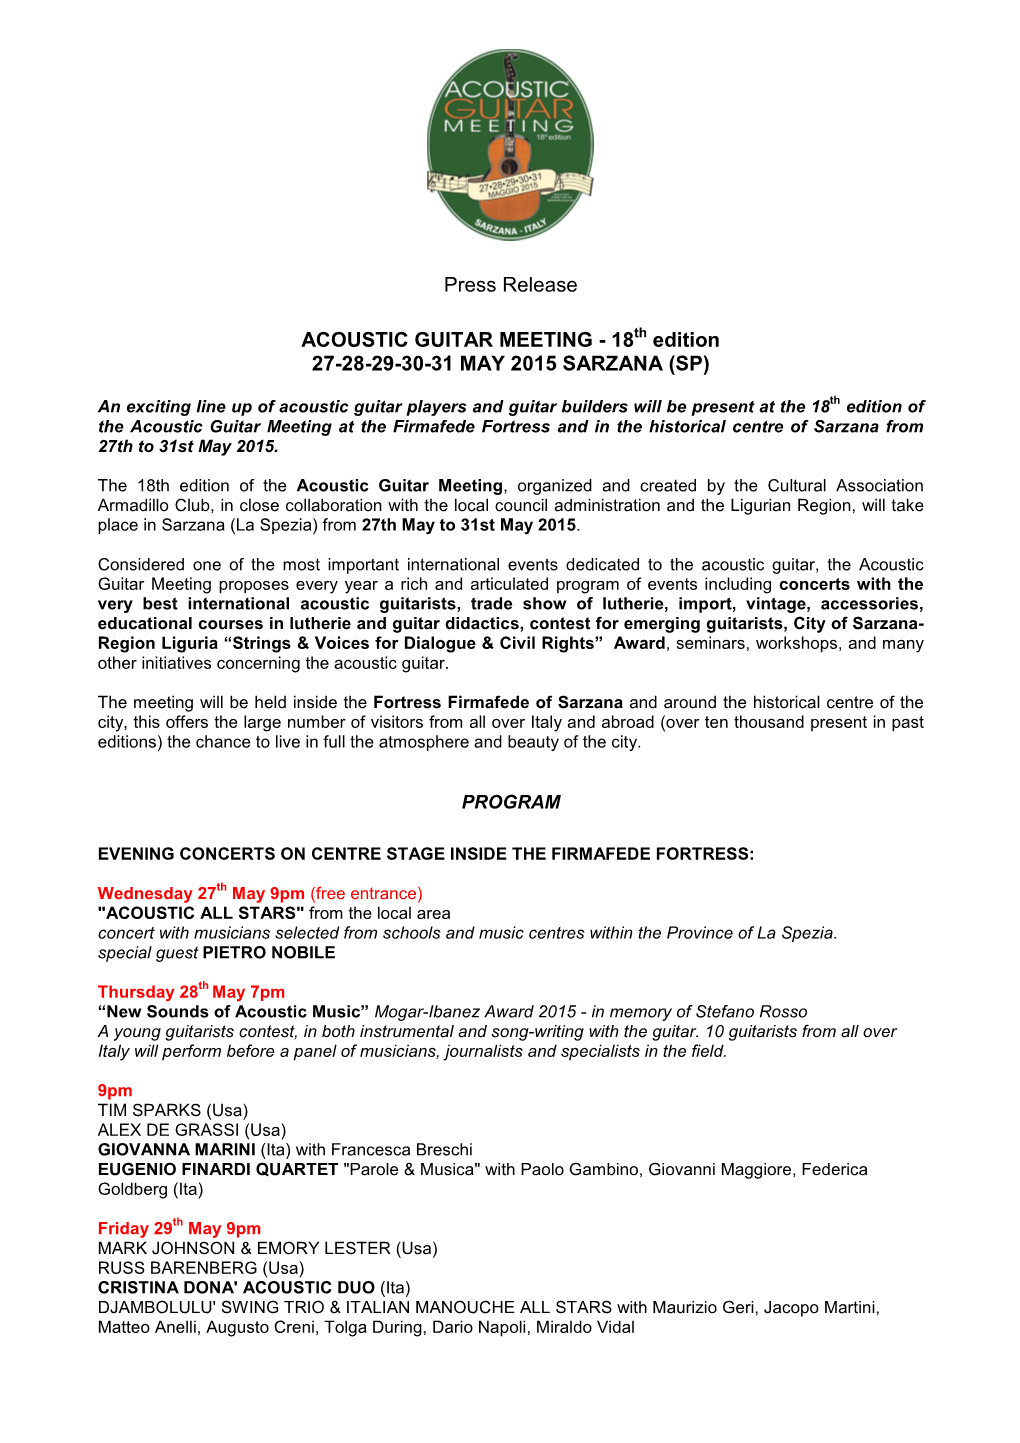 Press Release ACOUSTIC GUITAR MEETING 18Th Edition 2015